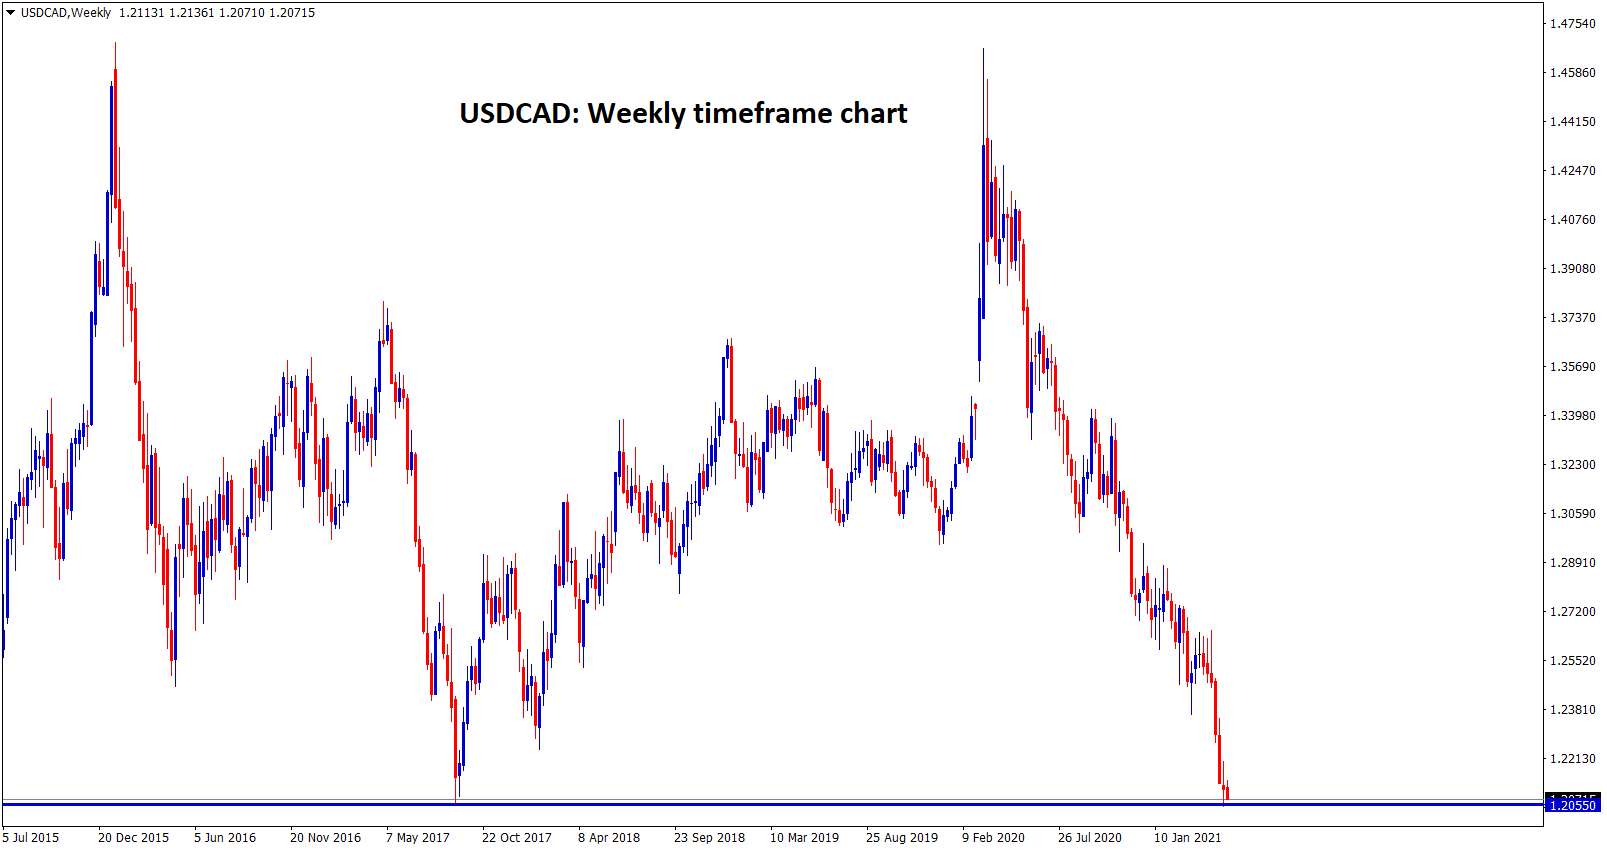 USDCAD testing the 2017 support level again on this week.